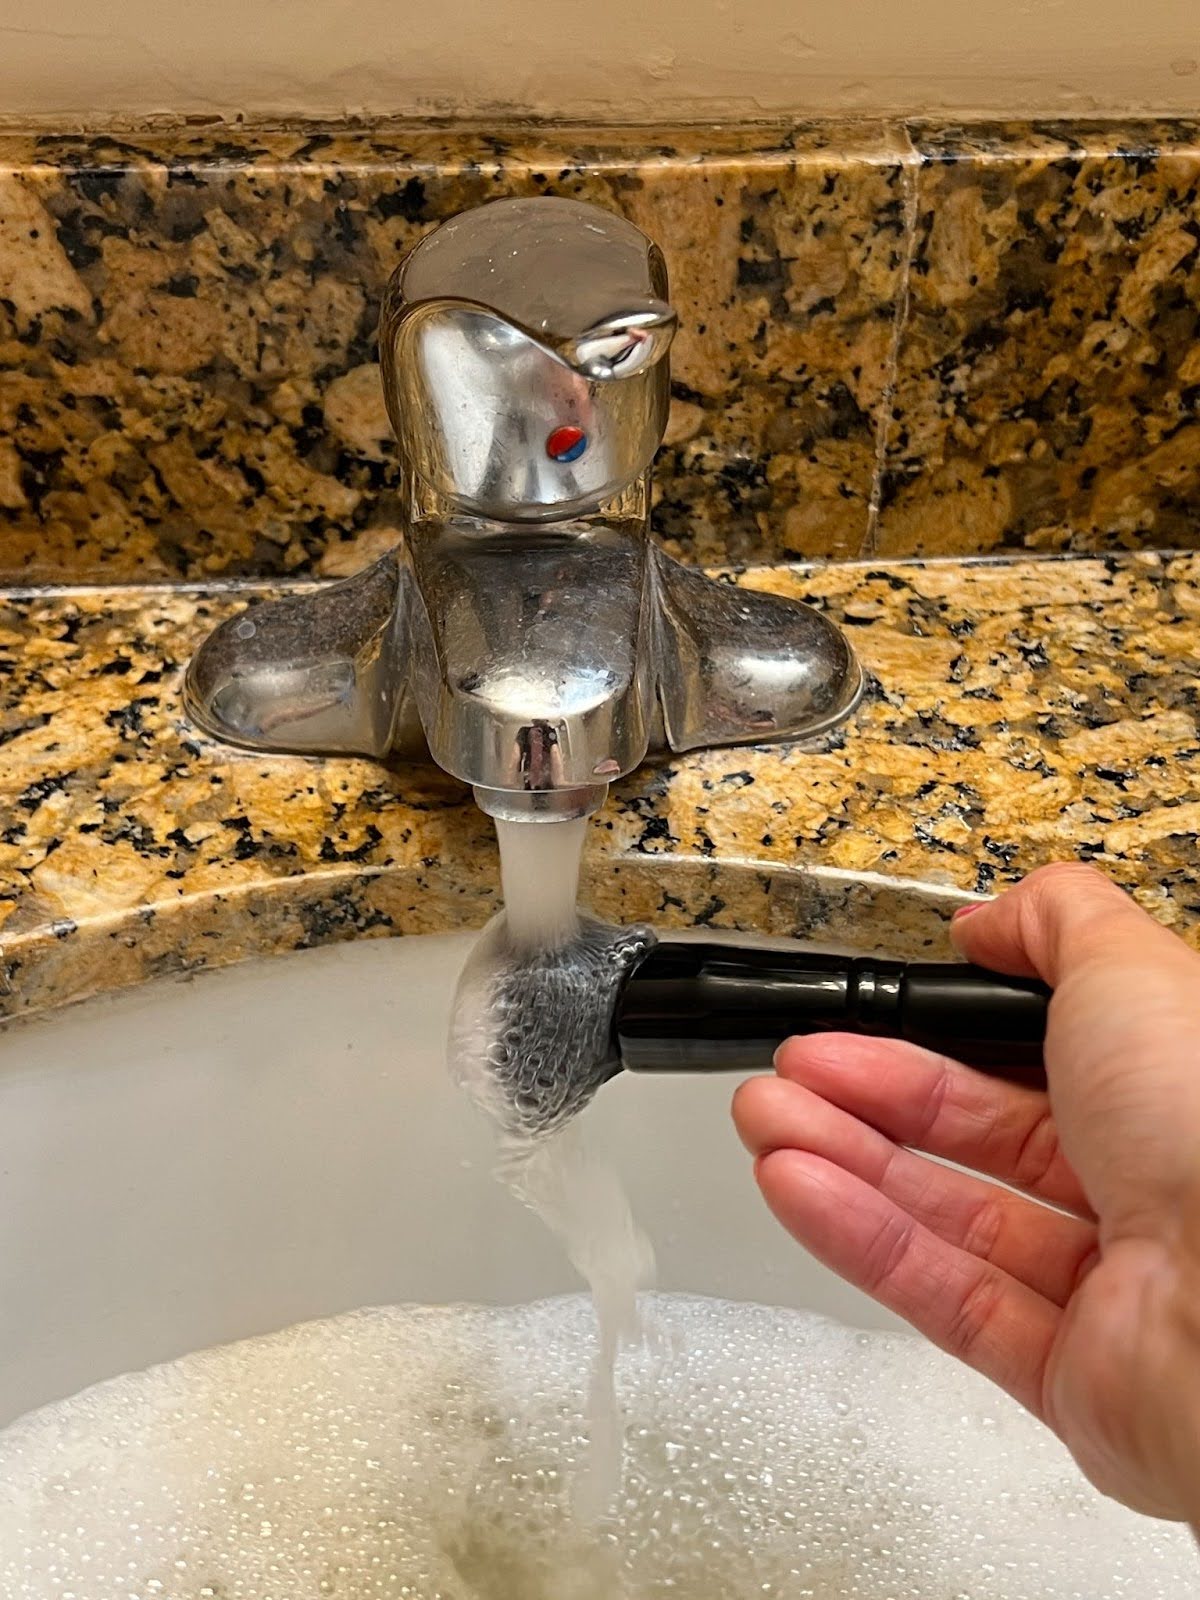 Rinse the makeup brush under running water to clean away soap and makeup, and repeat step 2 until the water runs clear.